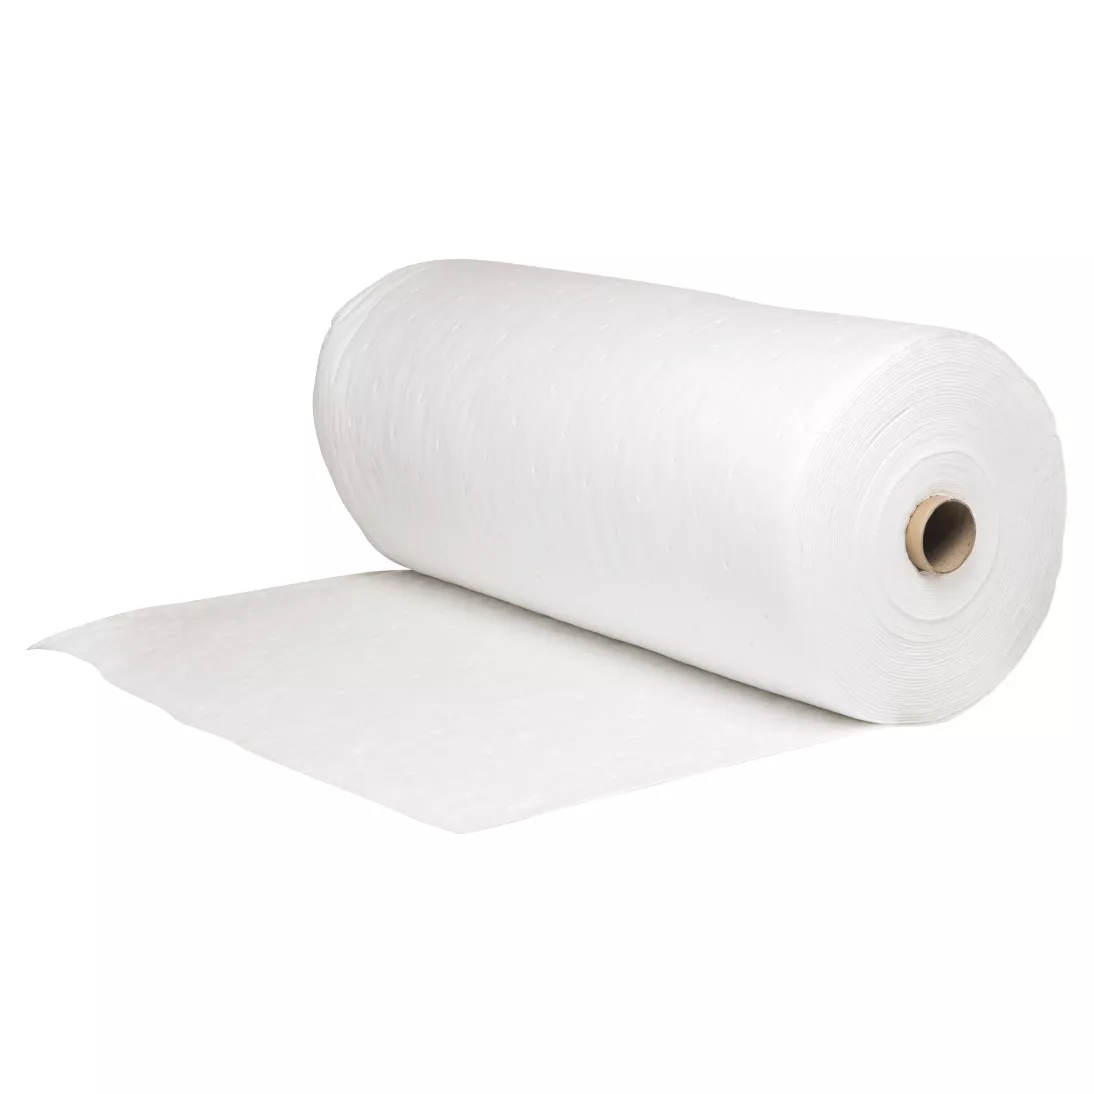 3M™ Petroleum Sorbent Static Resistant Roll HP-500, High Capacity, 1
Each/Case